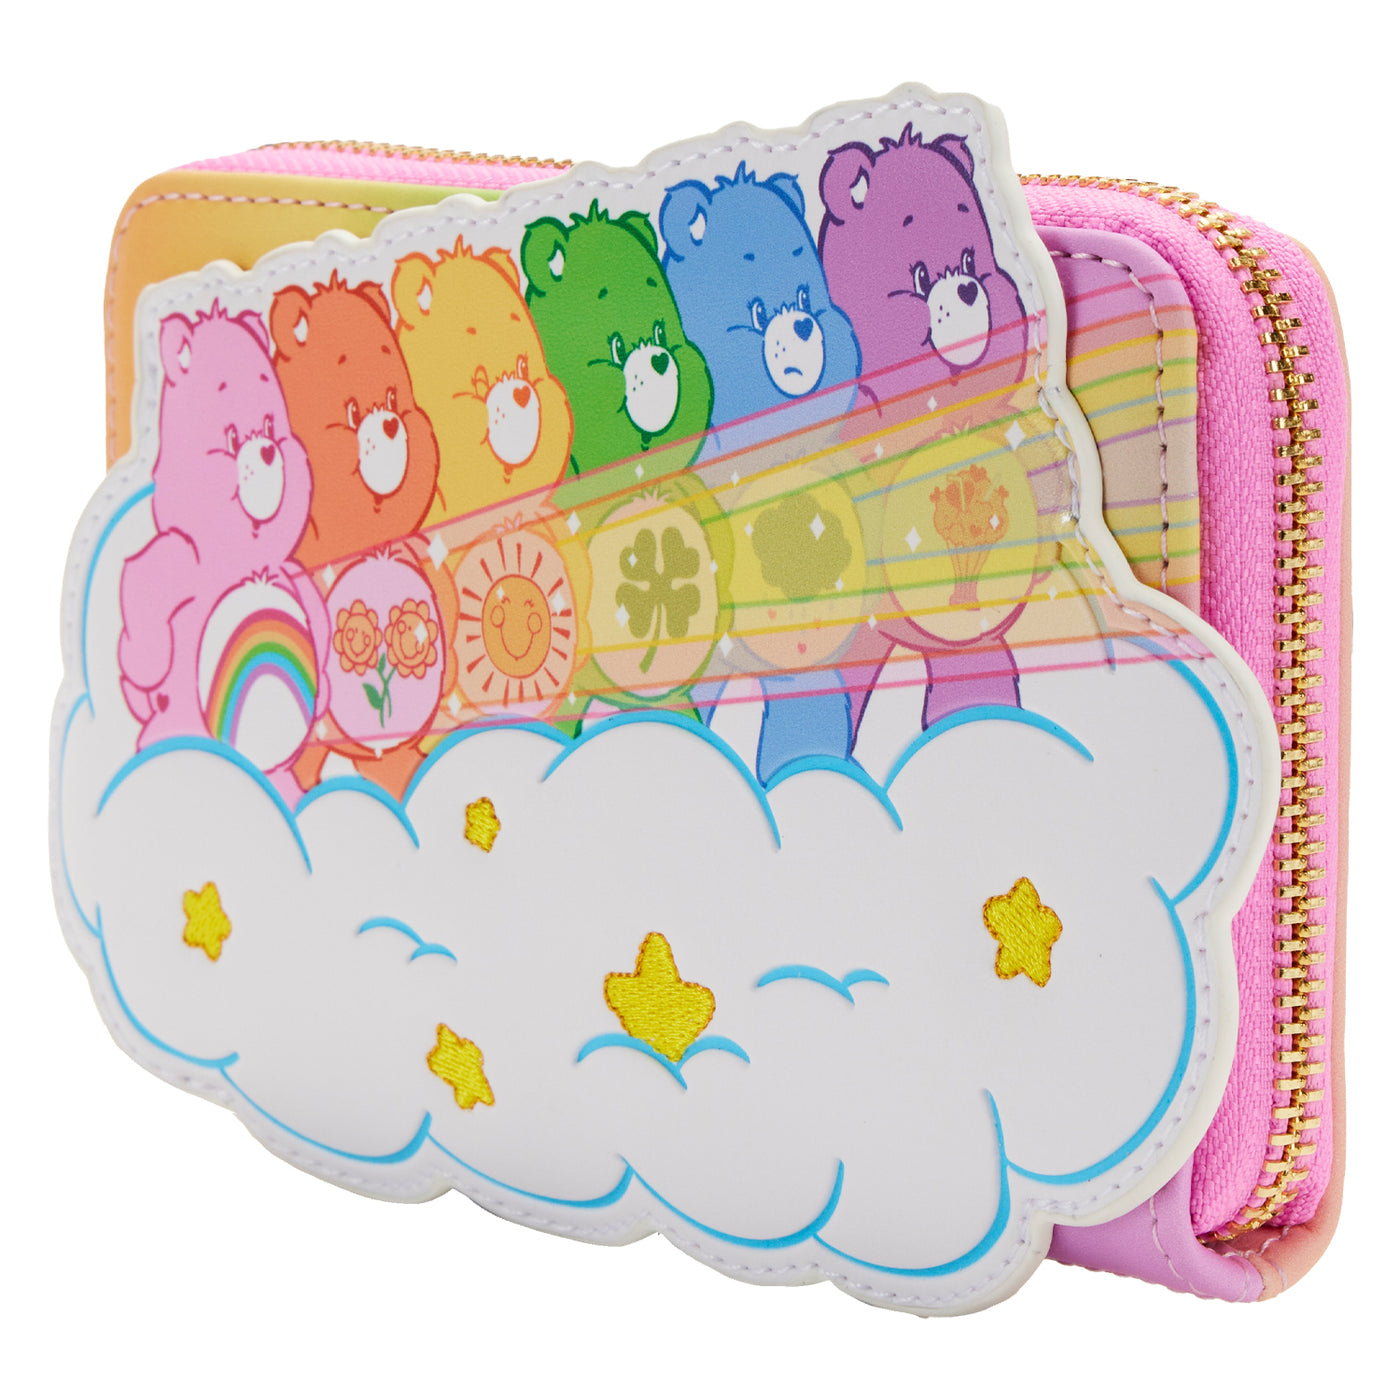 Loungefly Care Bears Stare Rainbow Wallet